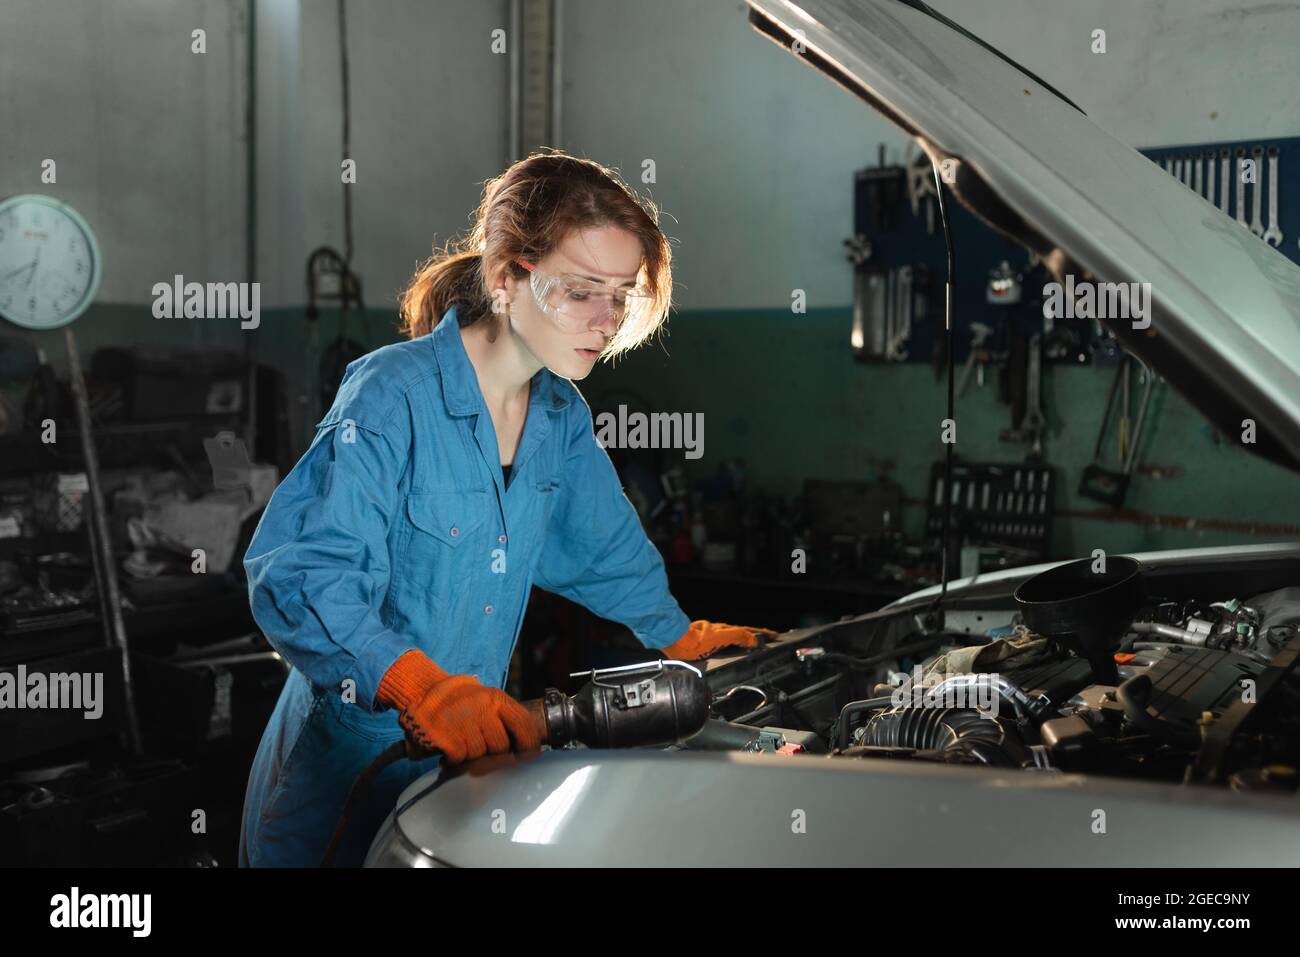 A young beautiful woman car mechanic is standing near the open hood of a car and makes a technical inspection at a service station. Stock Photo